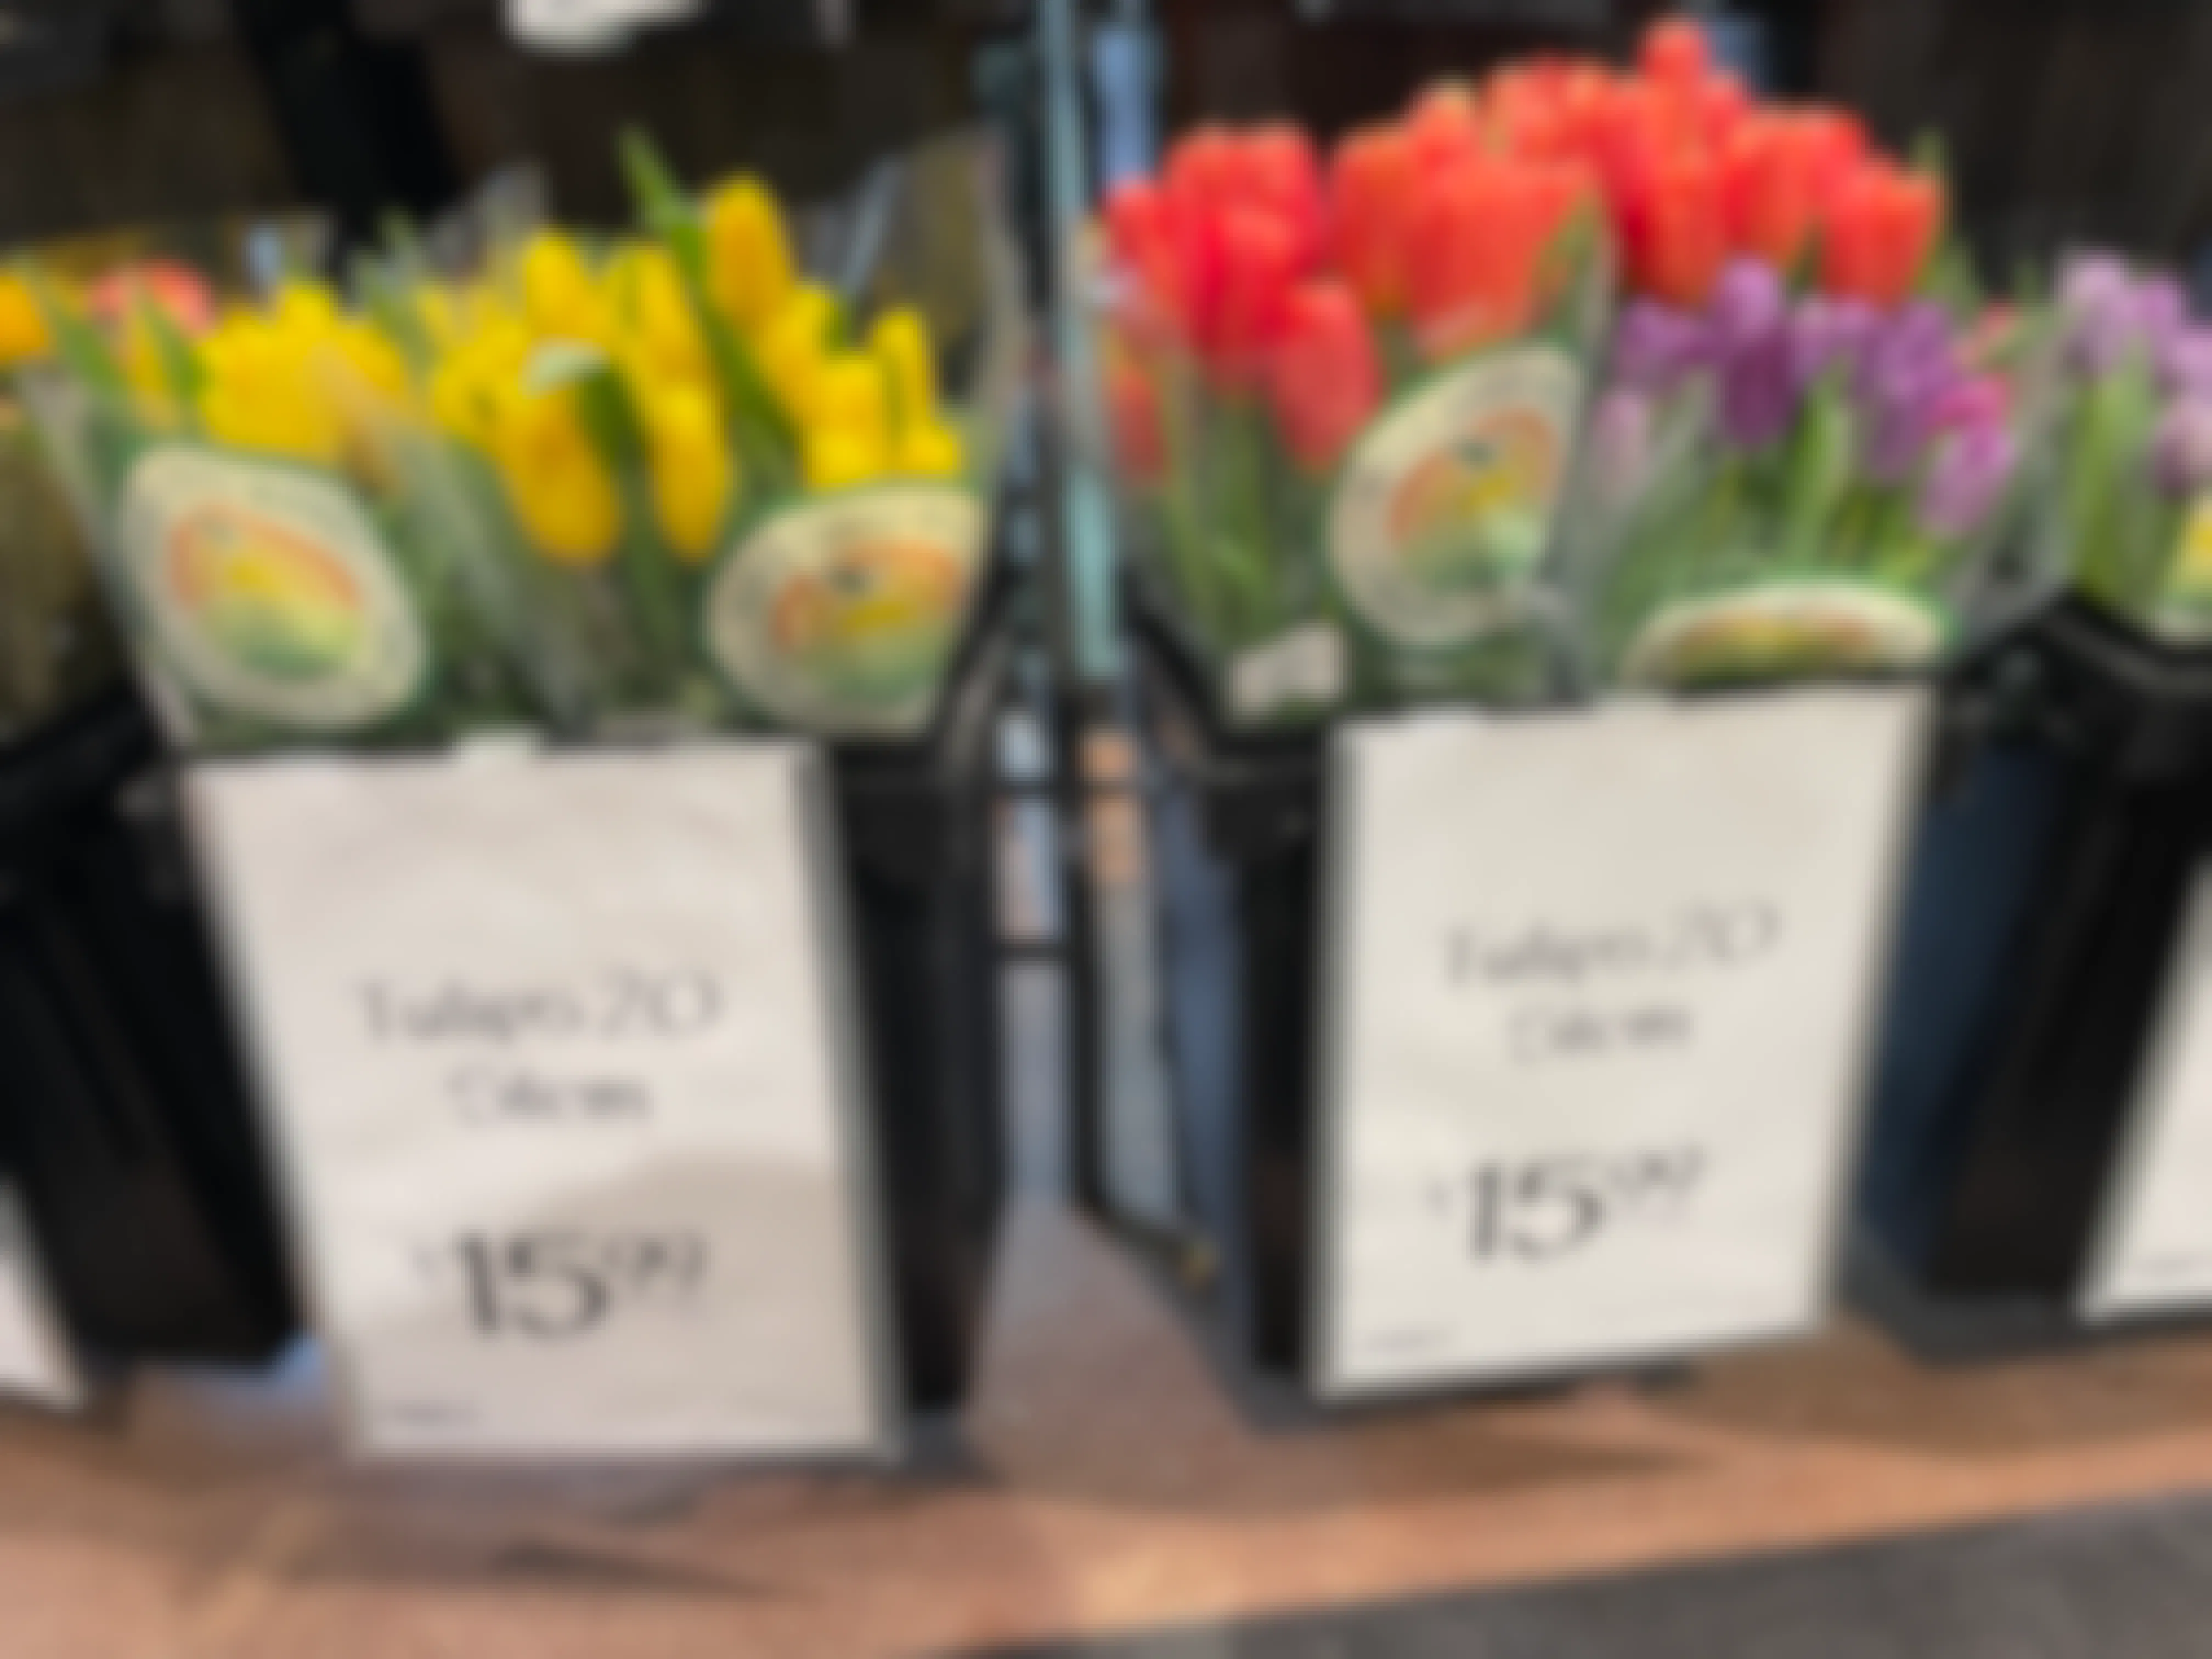 Tulips on display in a store